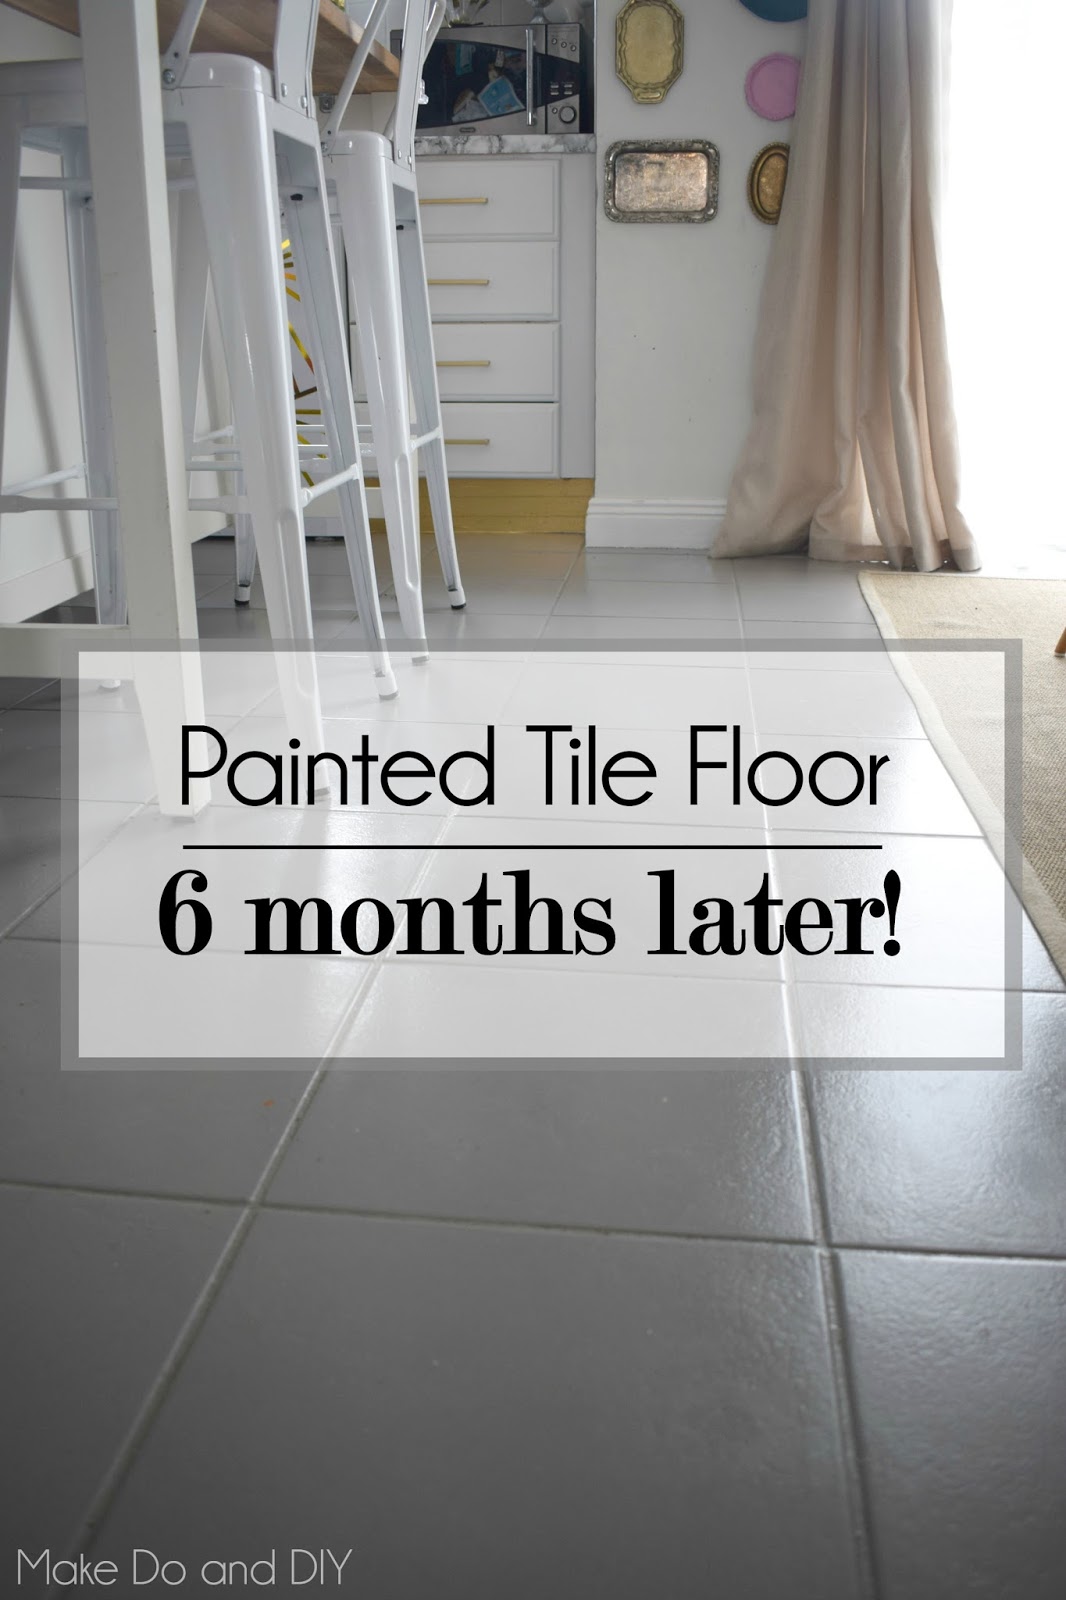 How can you paint ceramic tile?